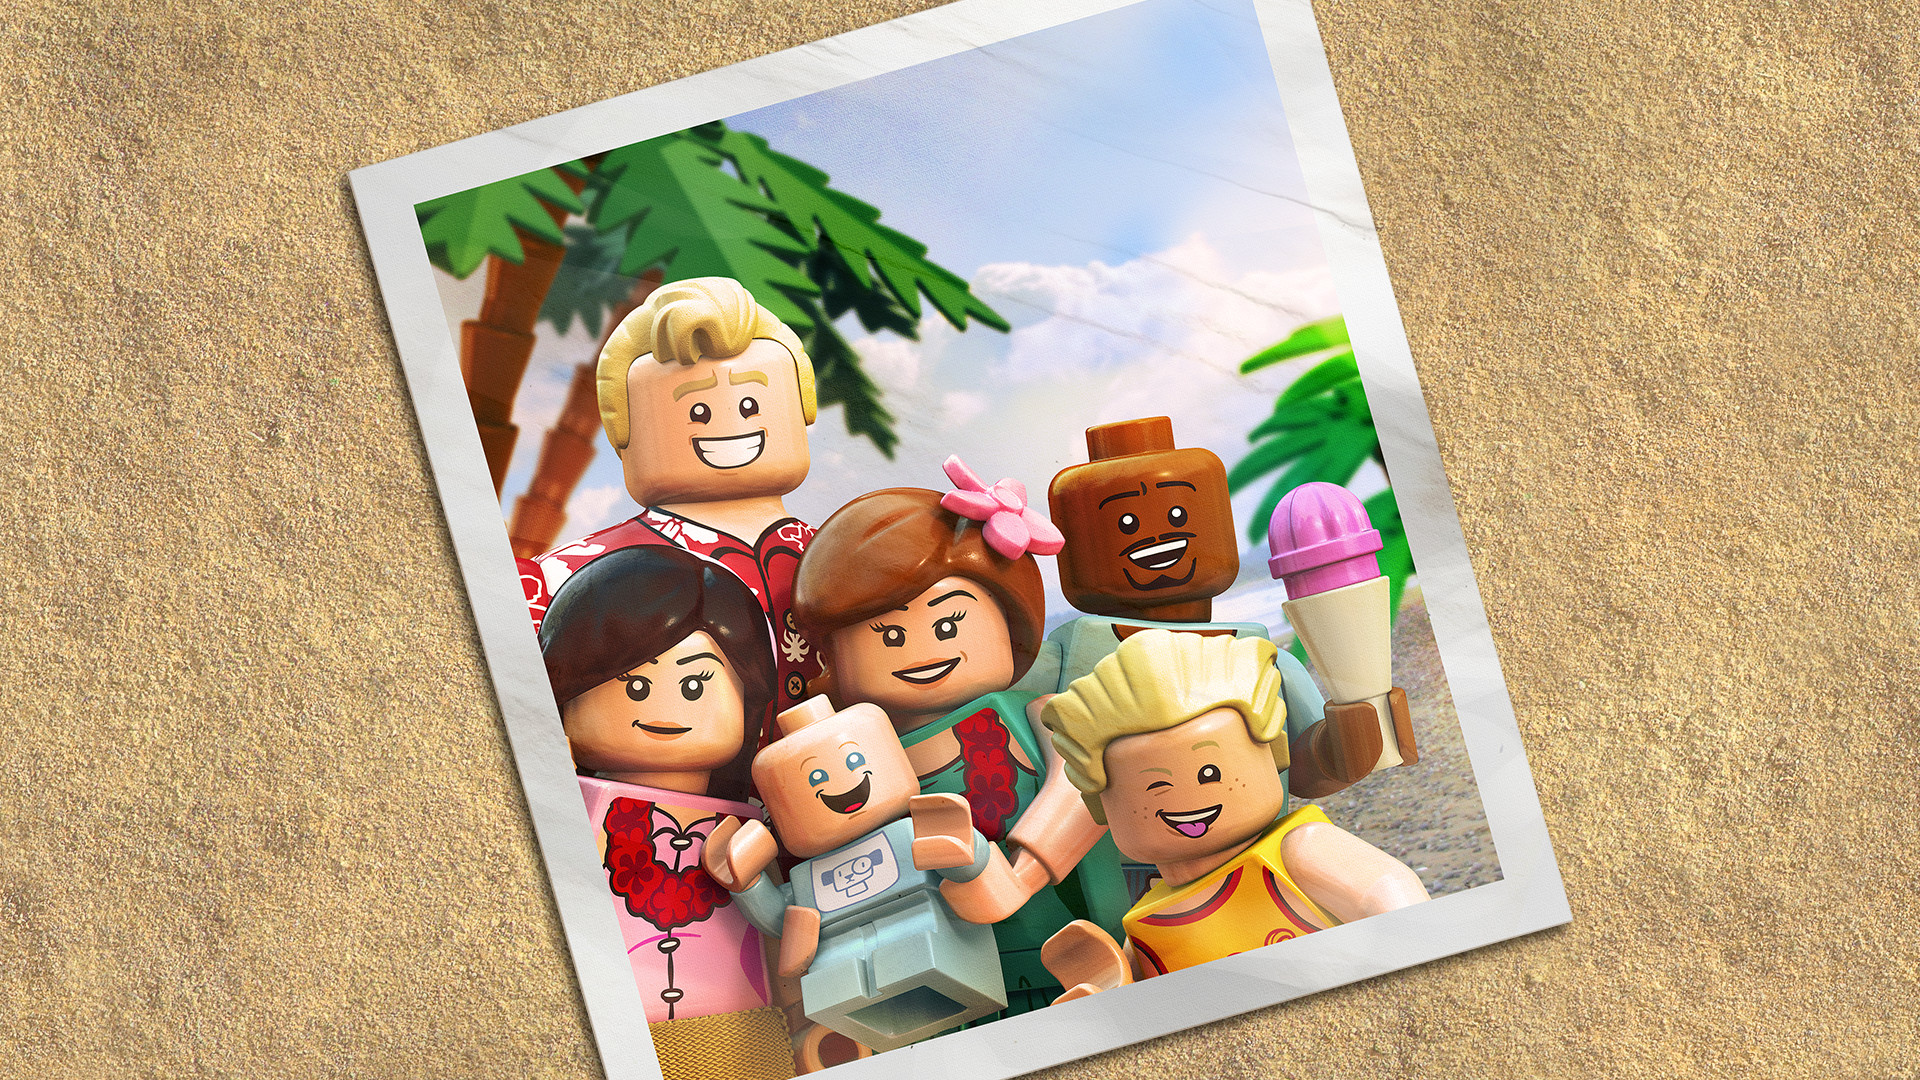 LEGO THE INCREDIBLES - Parr Family Vacation Character Pack DLC EU PS5 CD Key, $0.73